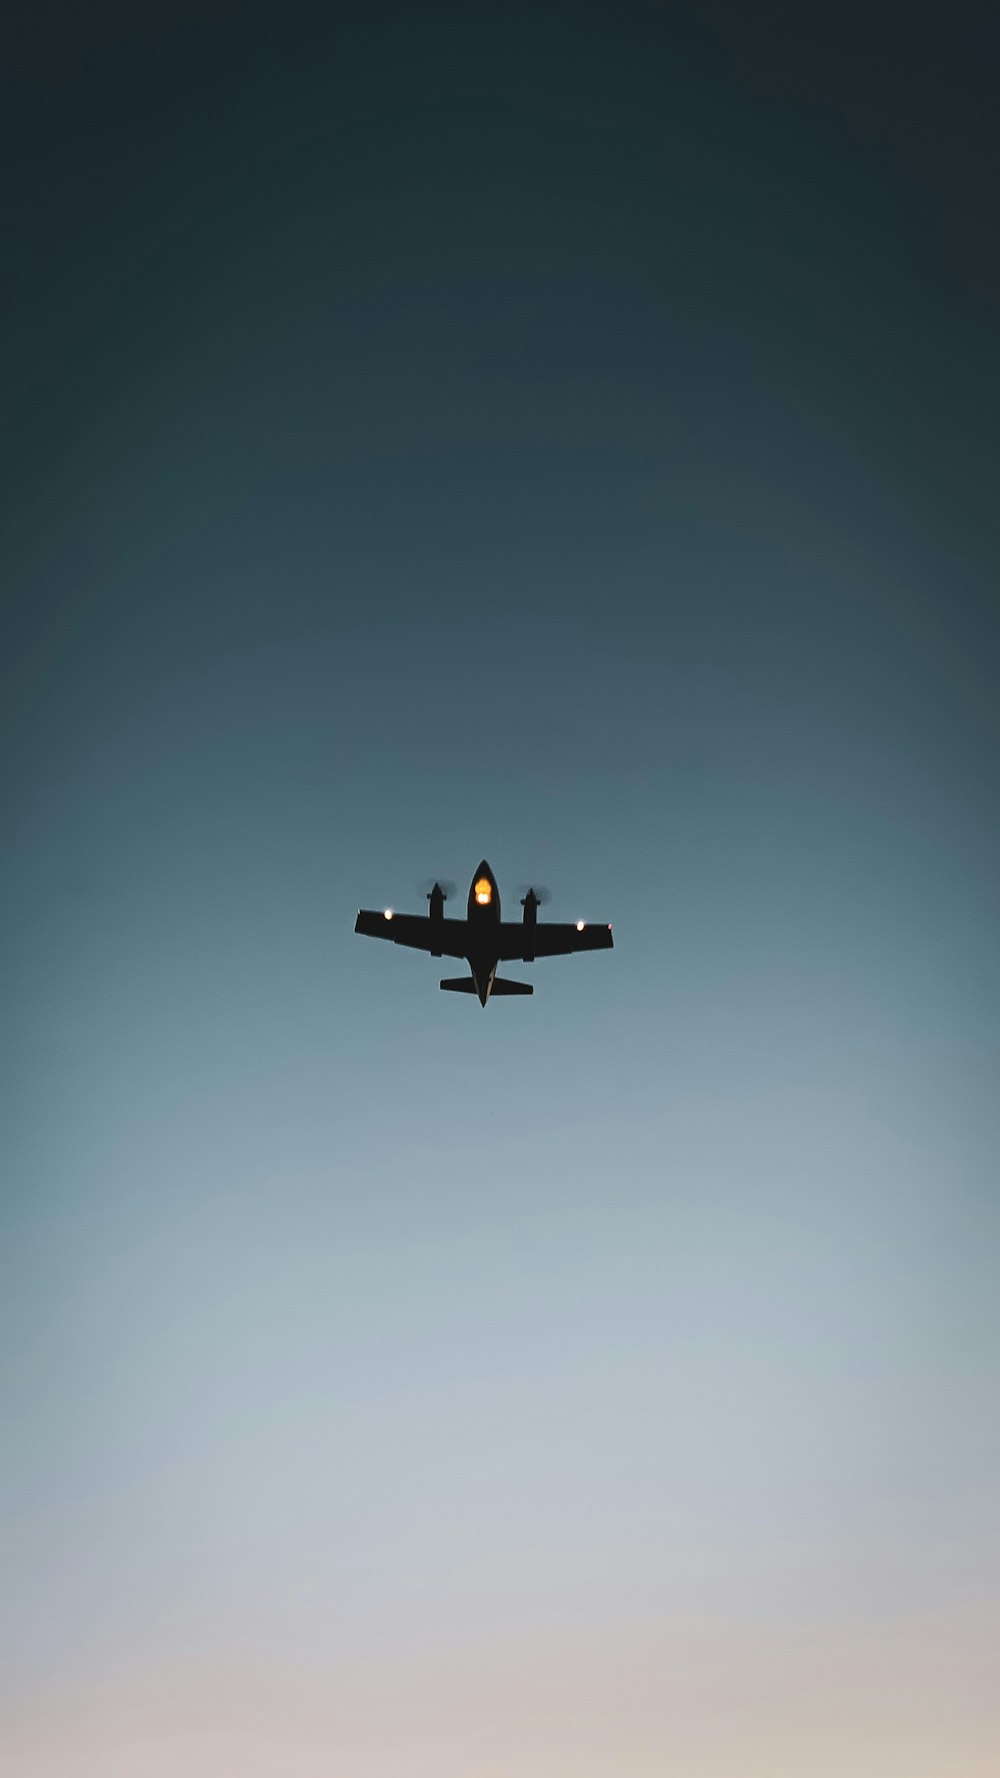 black and white airplane in mid air